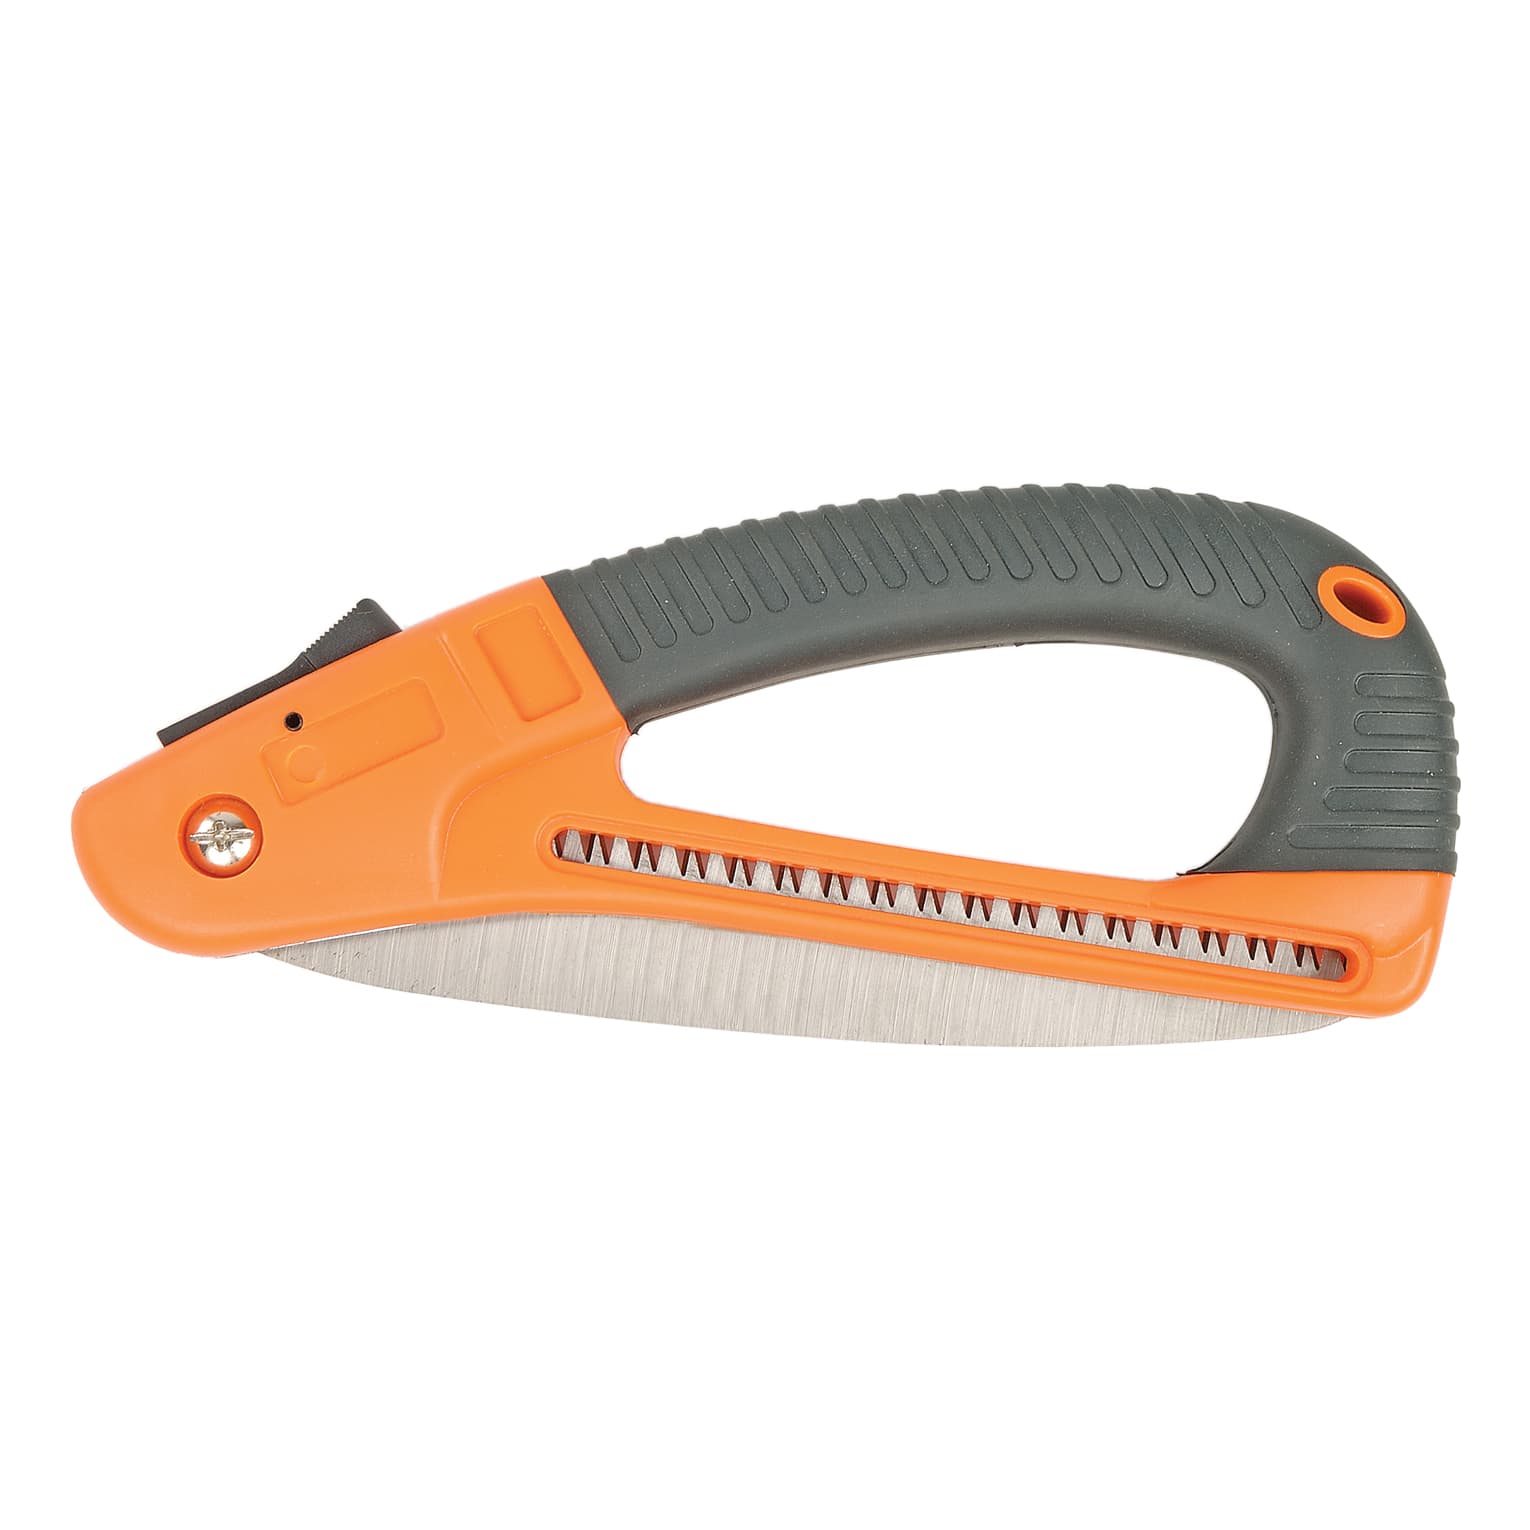 World Famous Folding Safety Saw w/Guard - Closed View